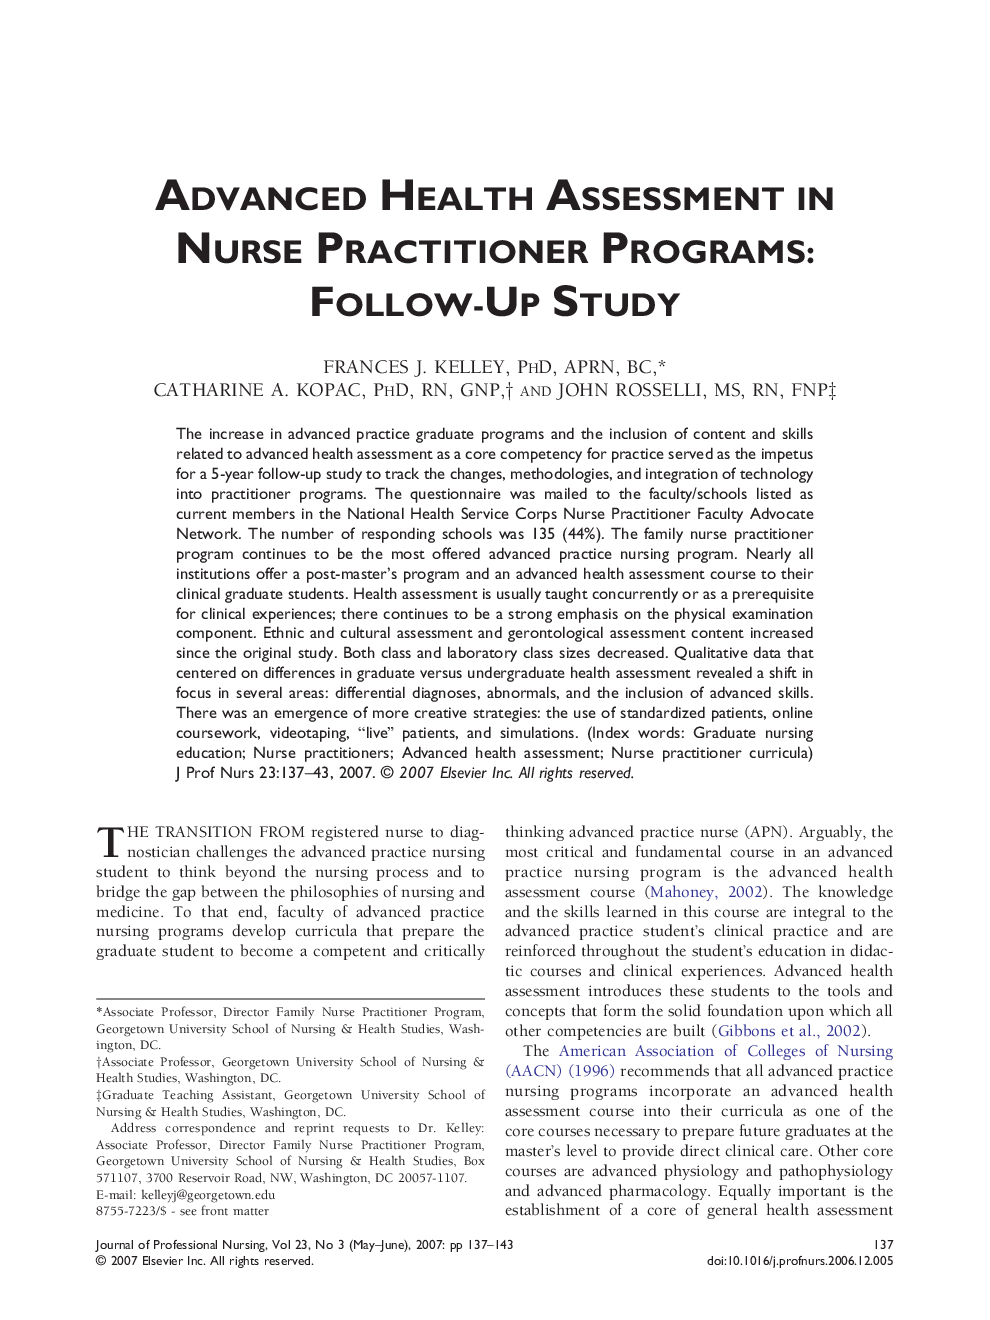 Advanced Health Assessment in Nurse Practitioner Programs: Follow-Up Study